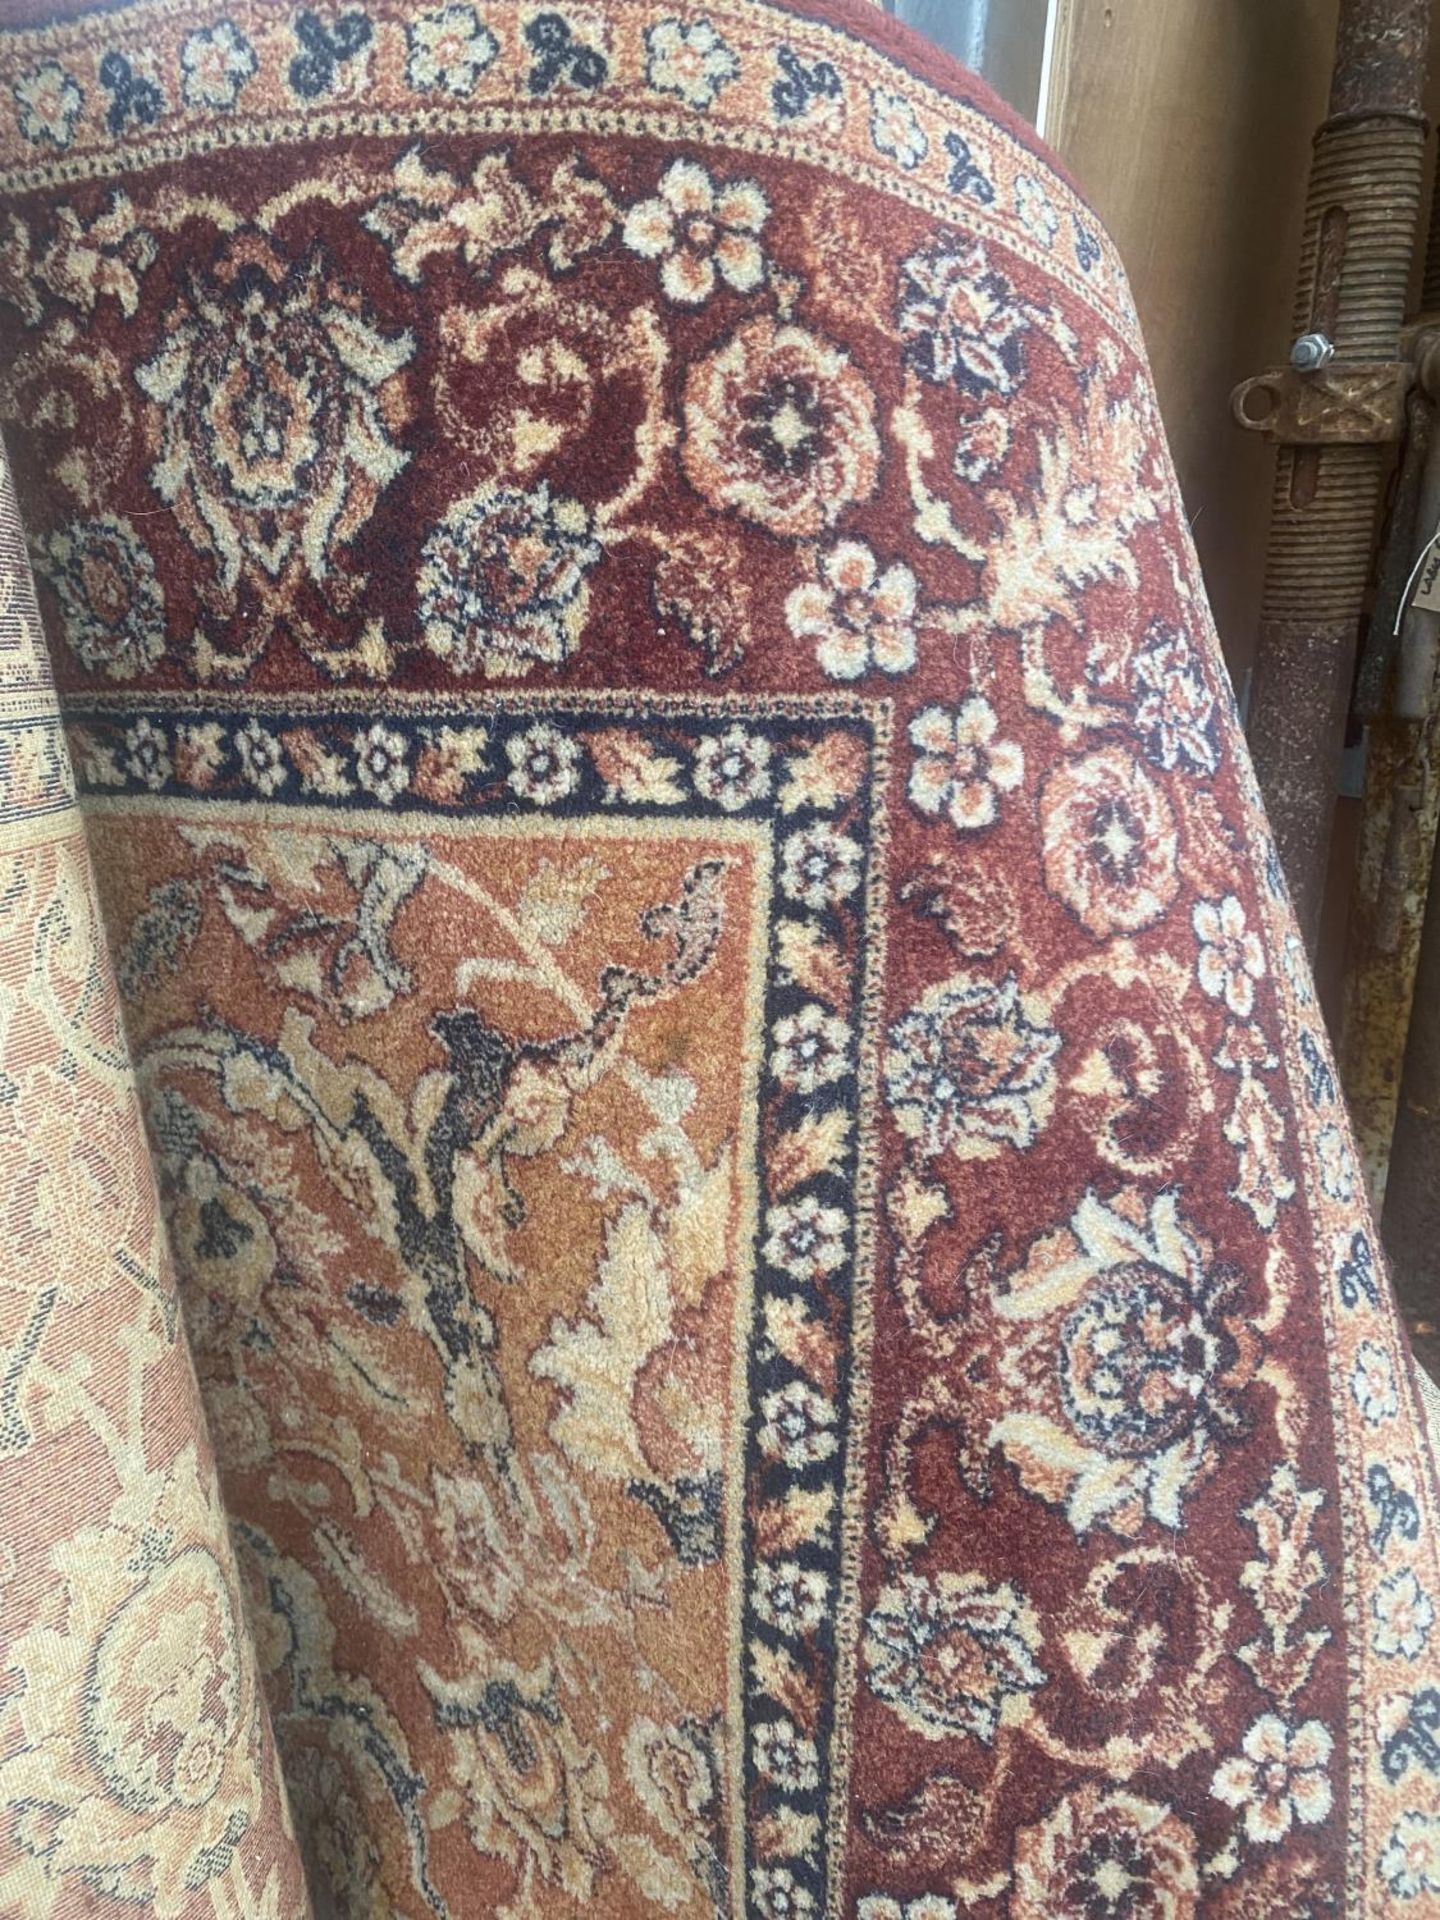 A LARGE RED AND CREAM PATTERNED RUG - Image 2 of 3